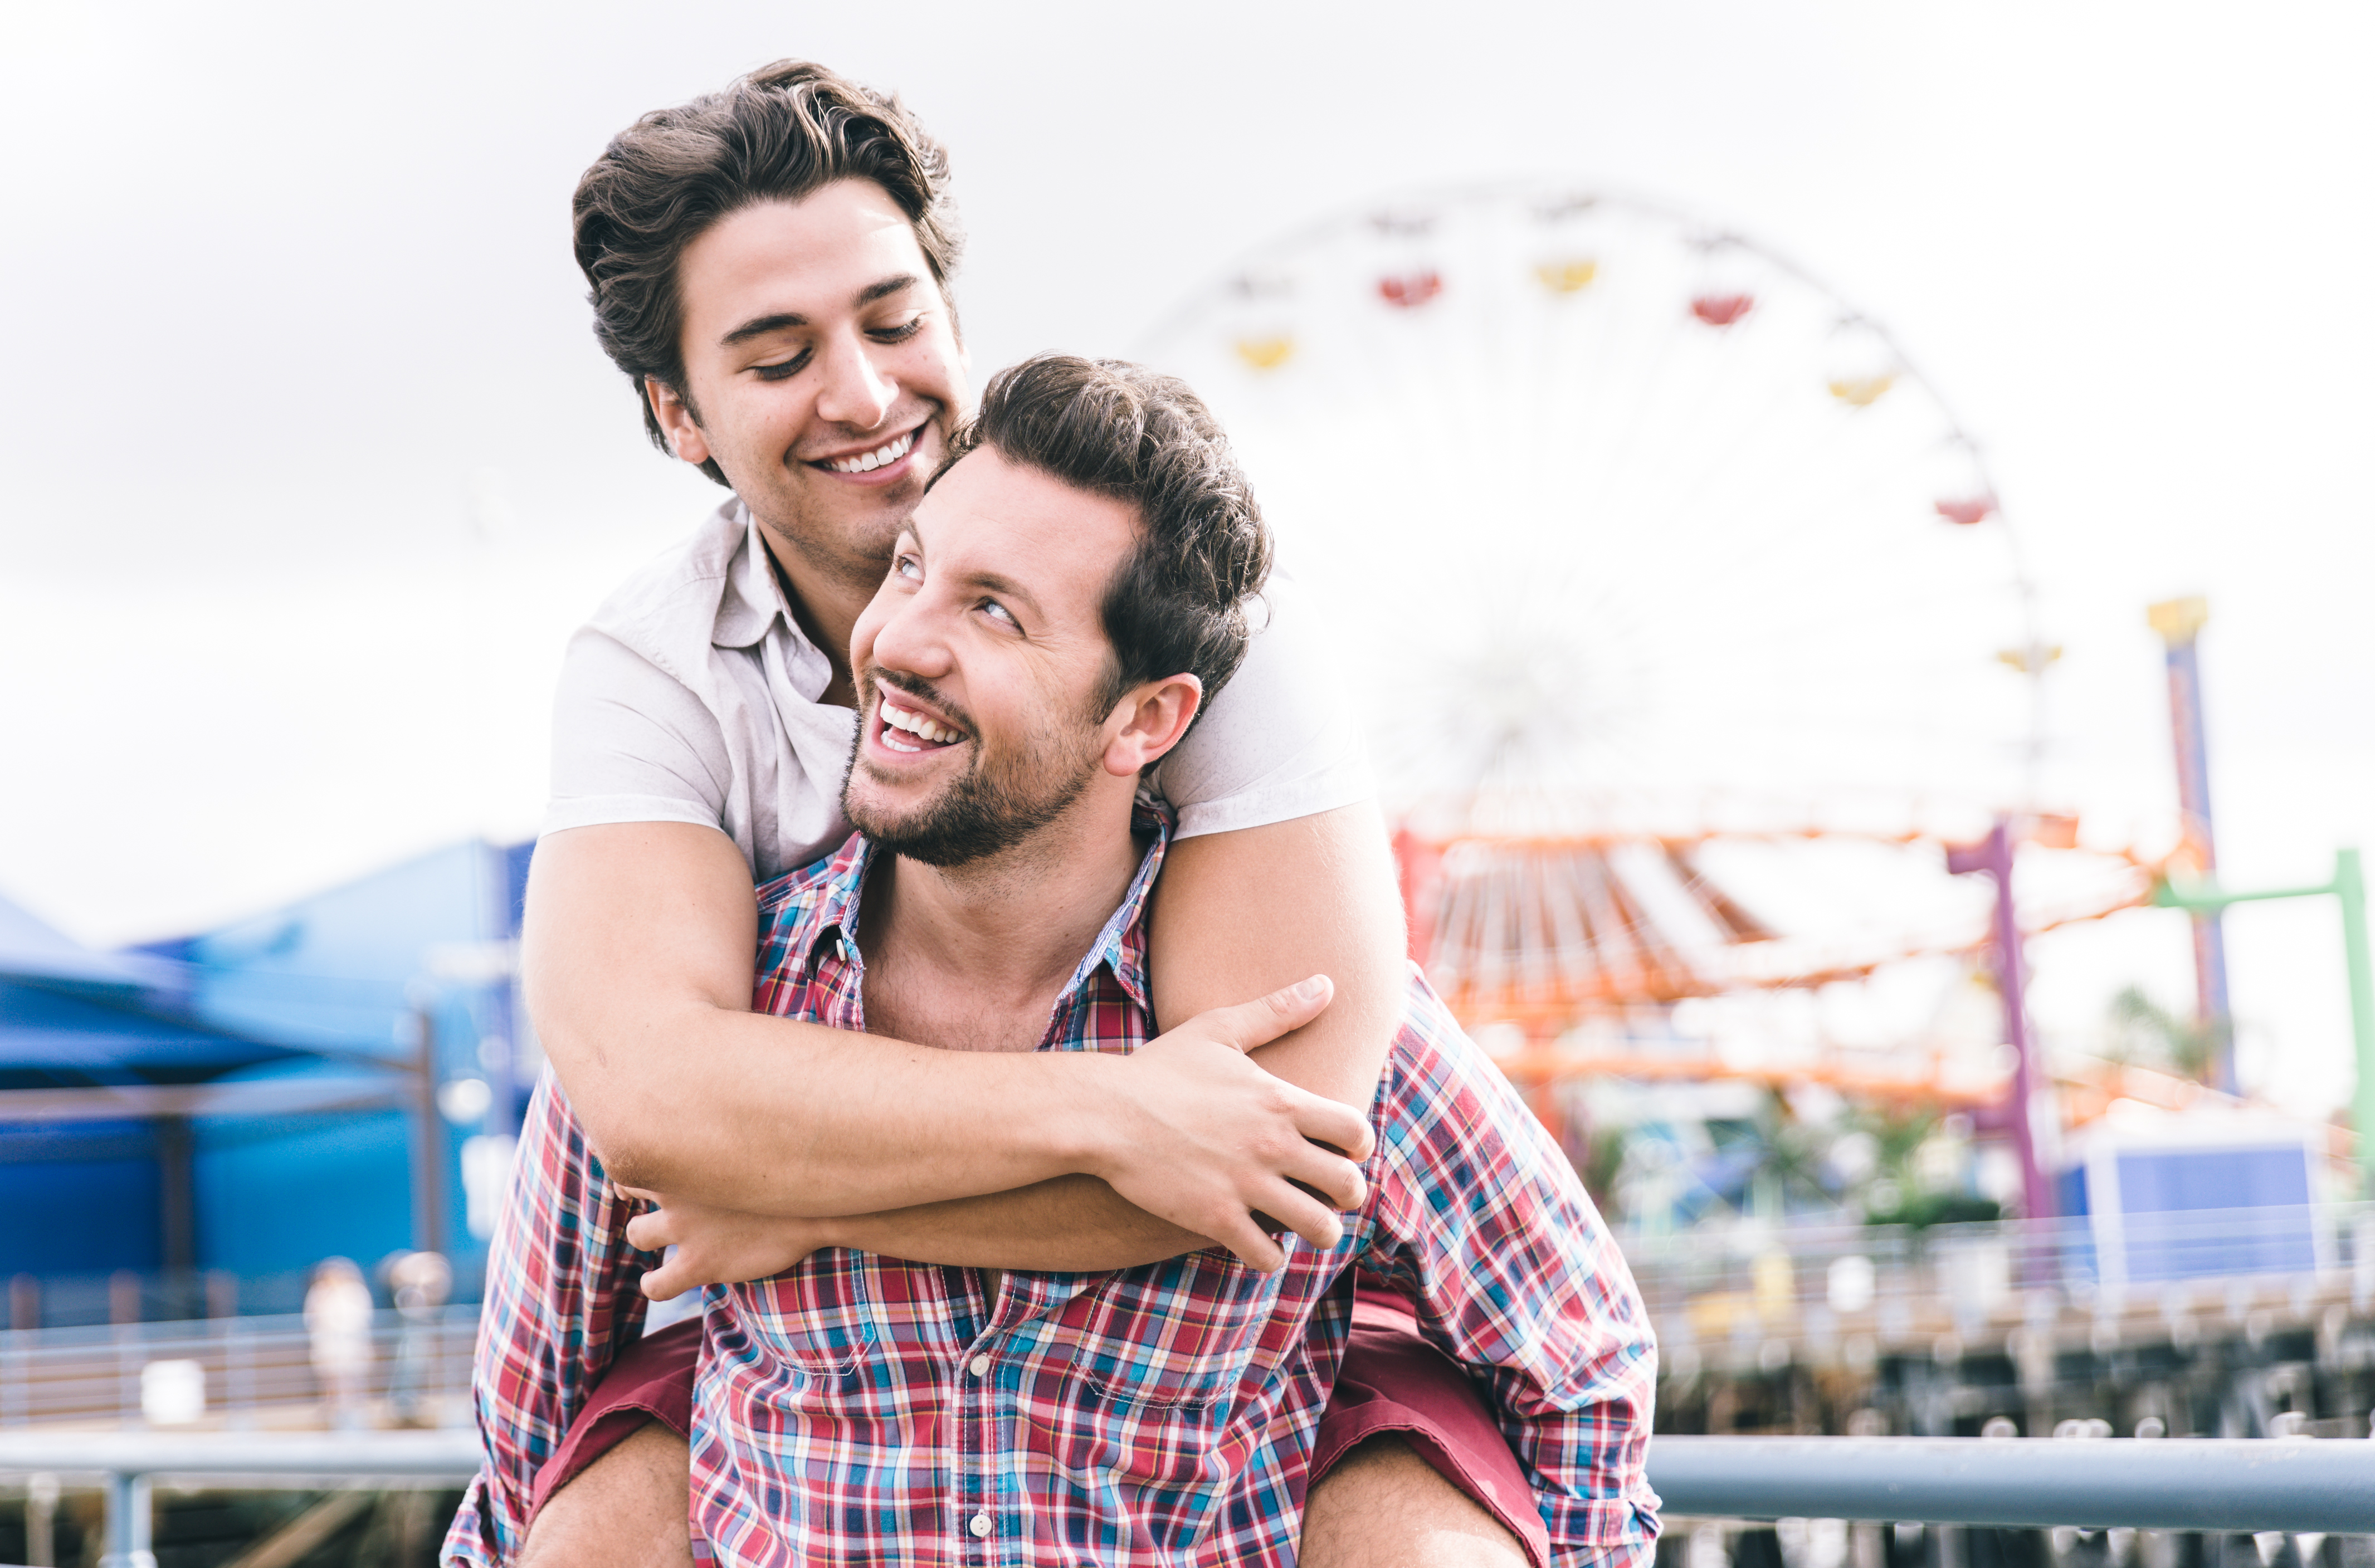 gay couples tend to keep things a bit more mentally positive